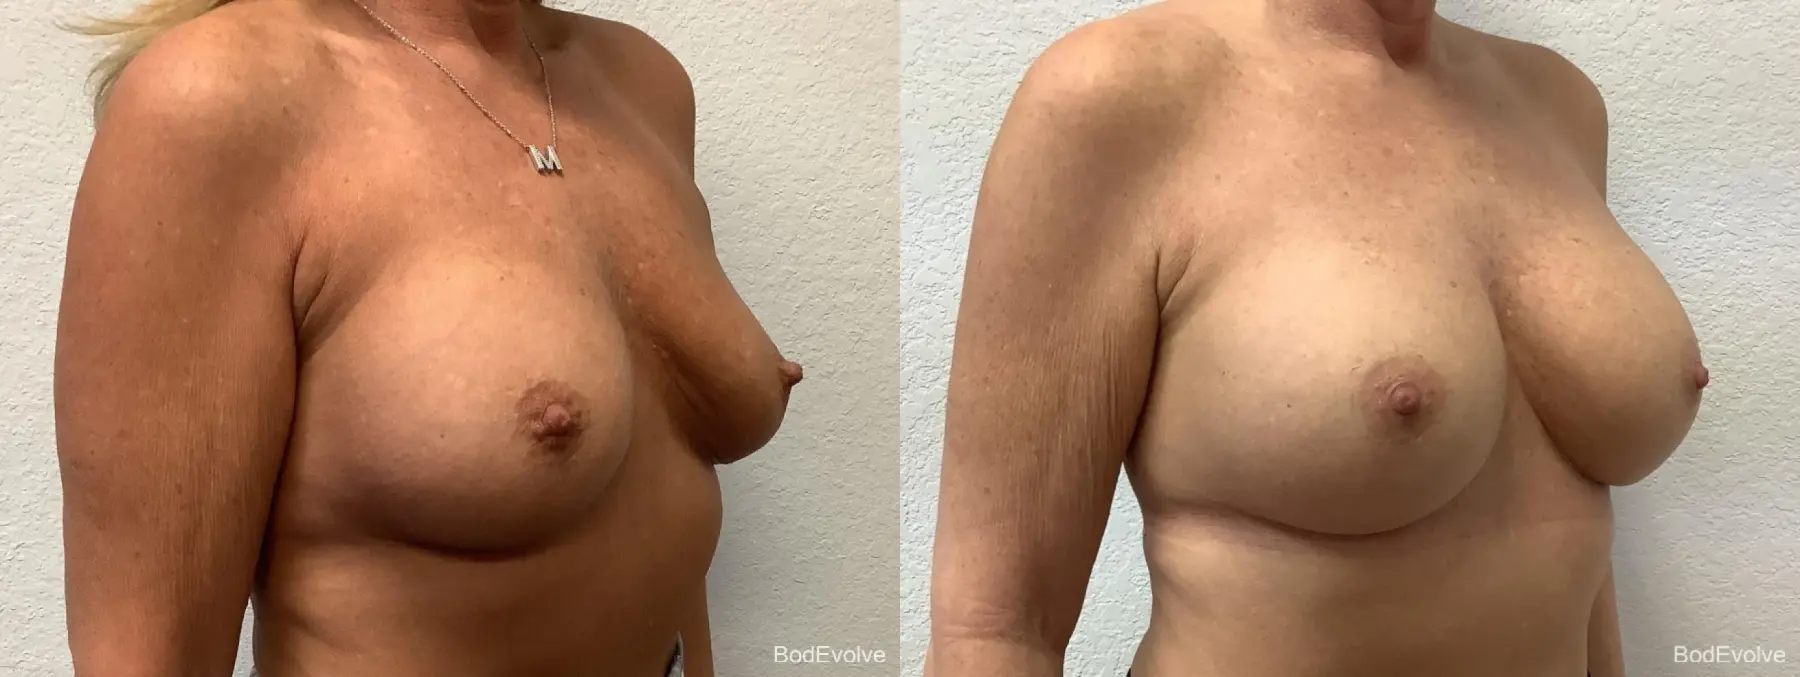 Breast Revision: Patient 1 - Before and After 4